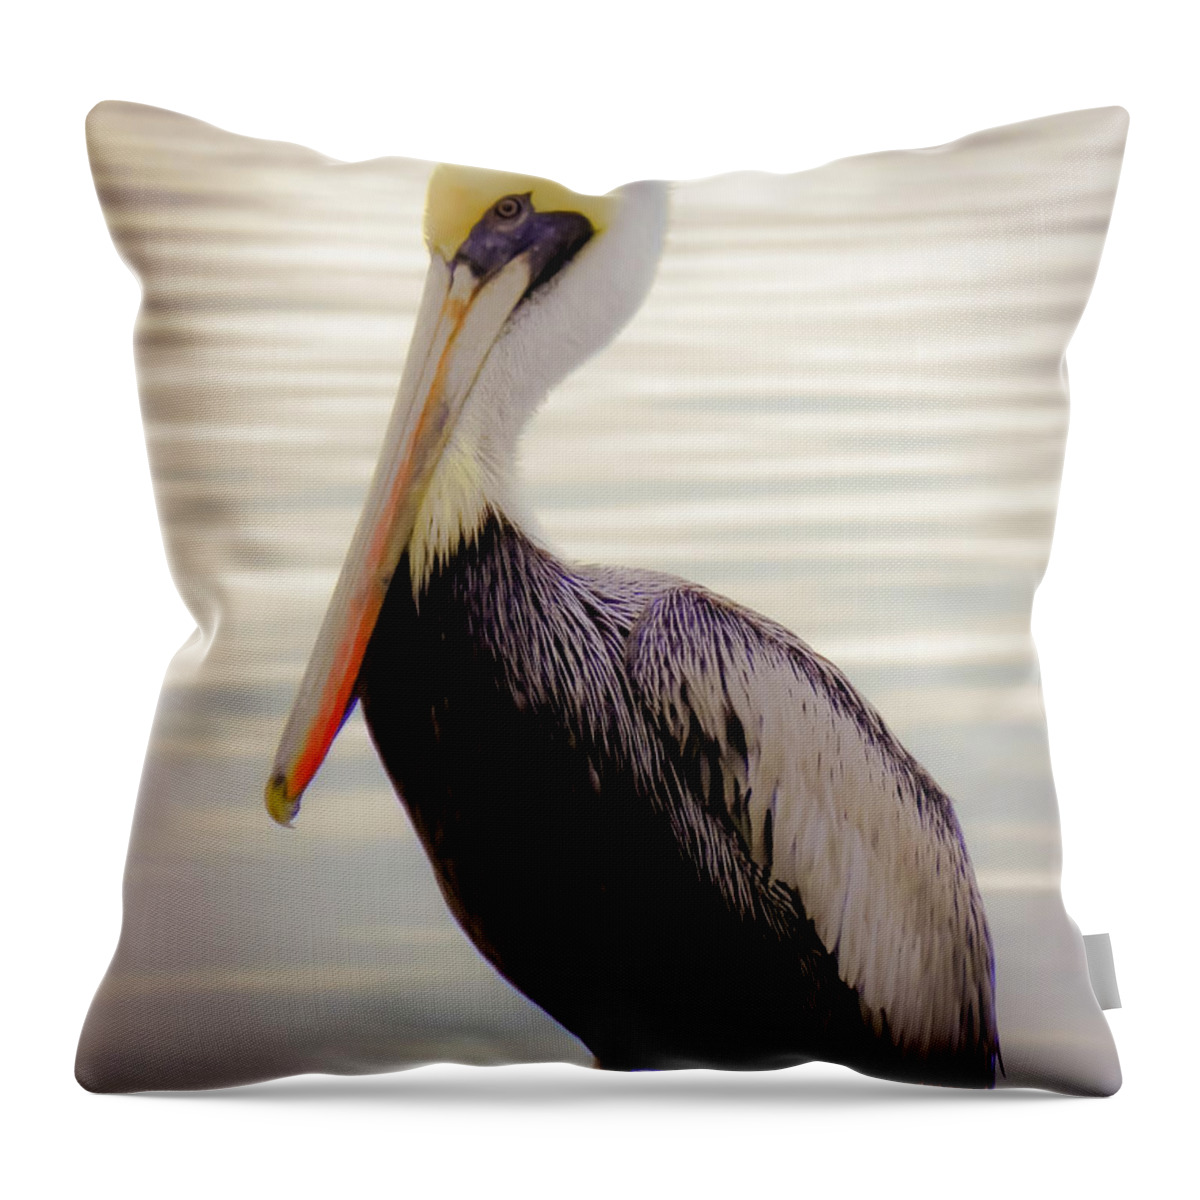 Bird Throw Pillow featuring the photograph My Visitor by Karen Wiles